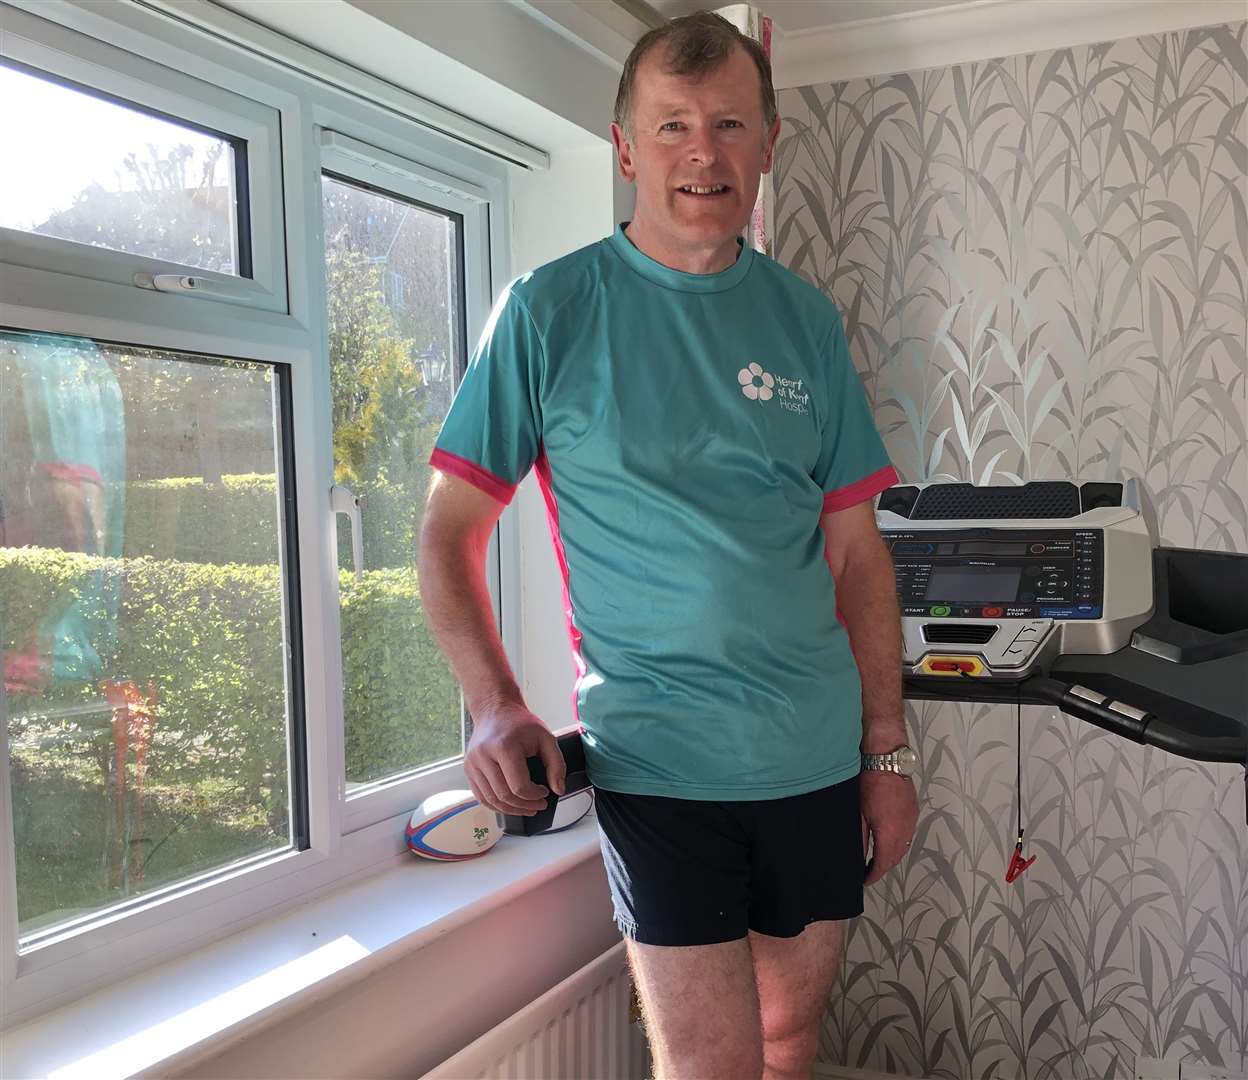 Tom Corkery is running 13.1 miles for the Heart of Kent Hospice in Aylesford